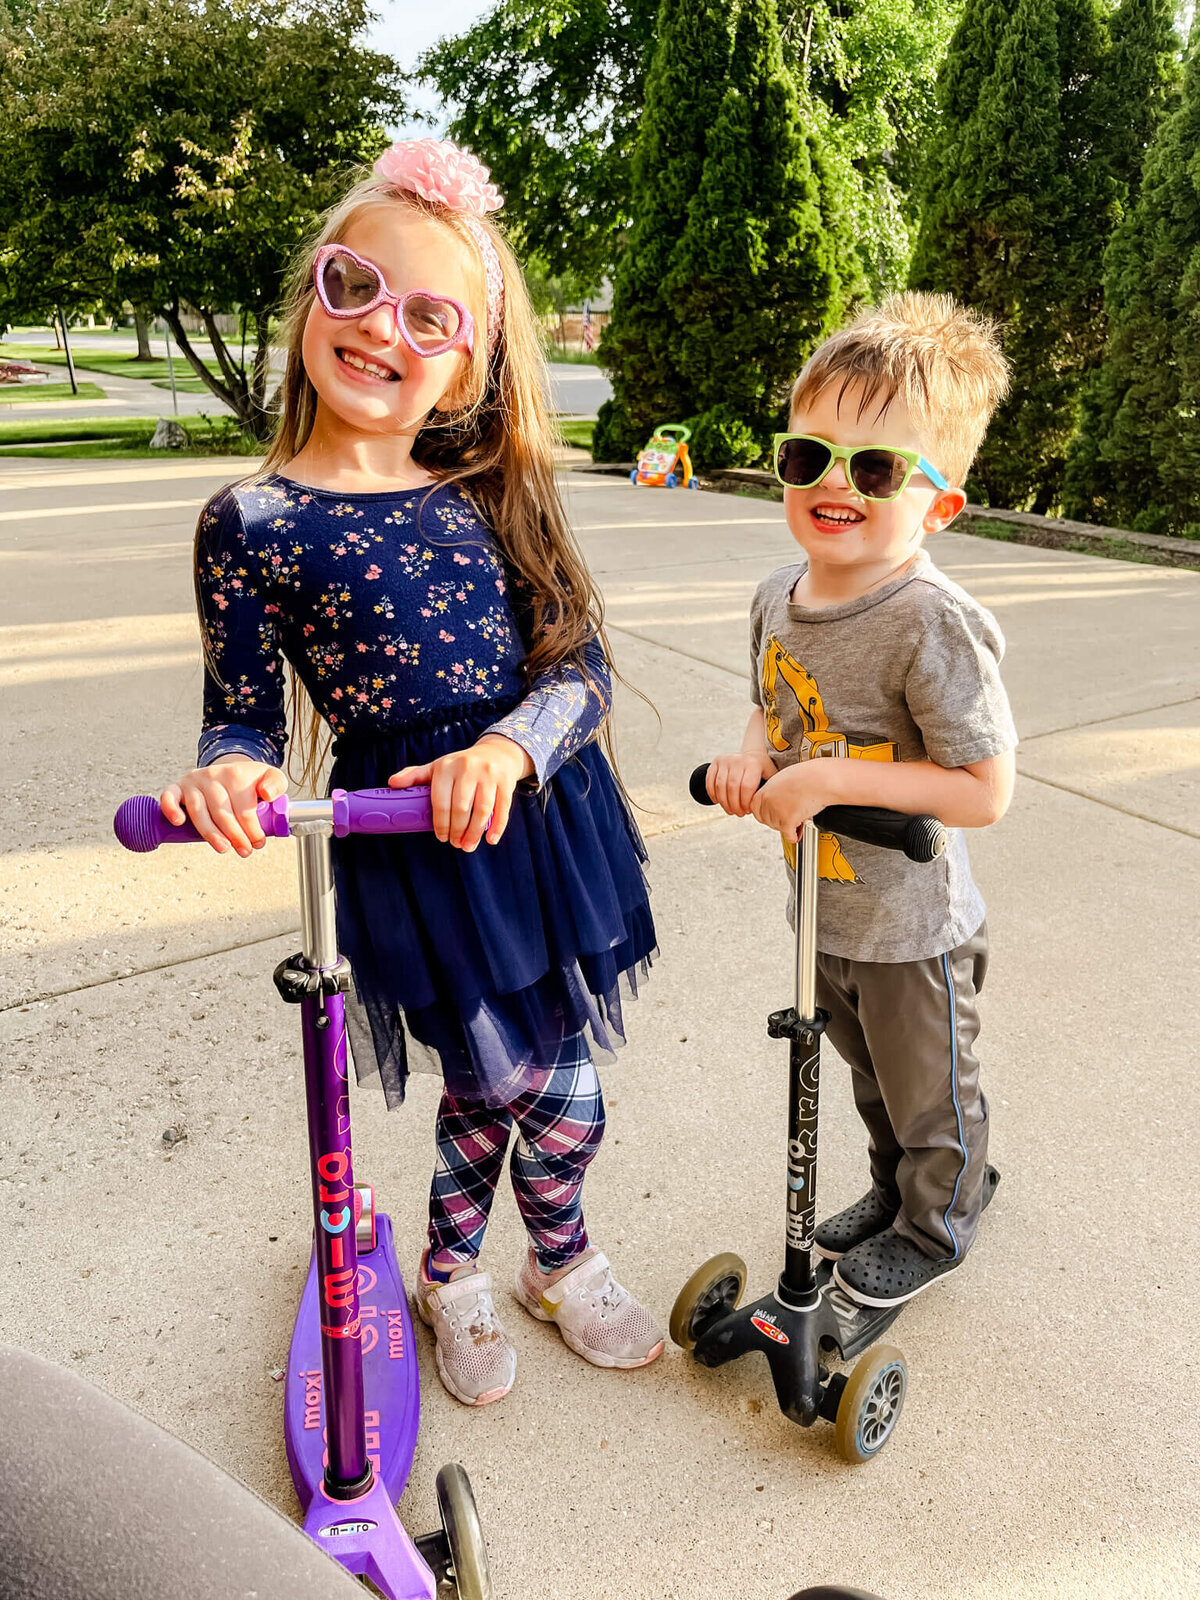 A brother and sister wearing sunglasses and riding a scooter near Naperville, IL.